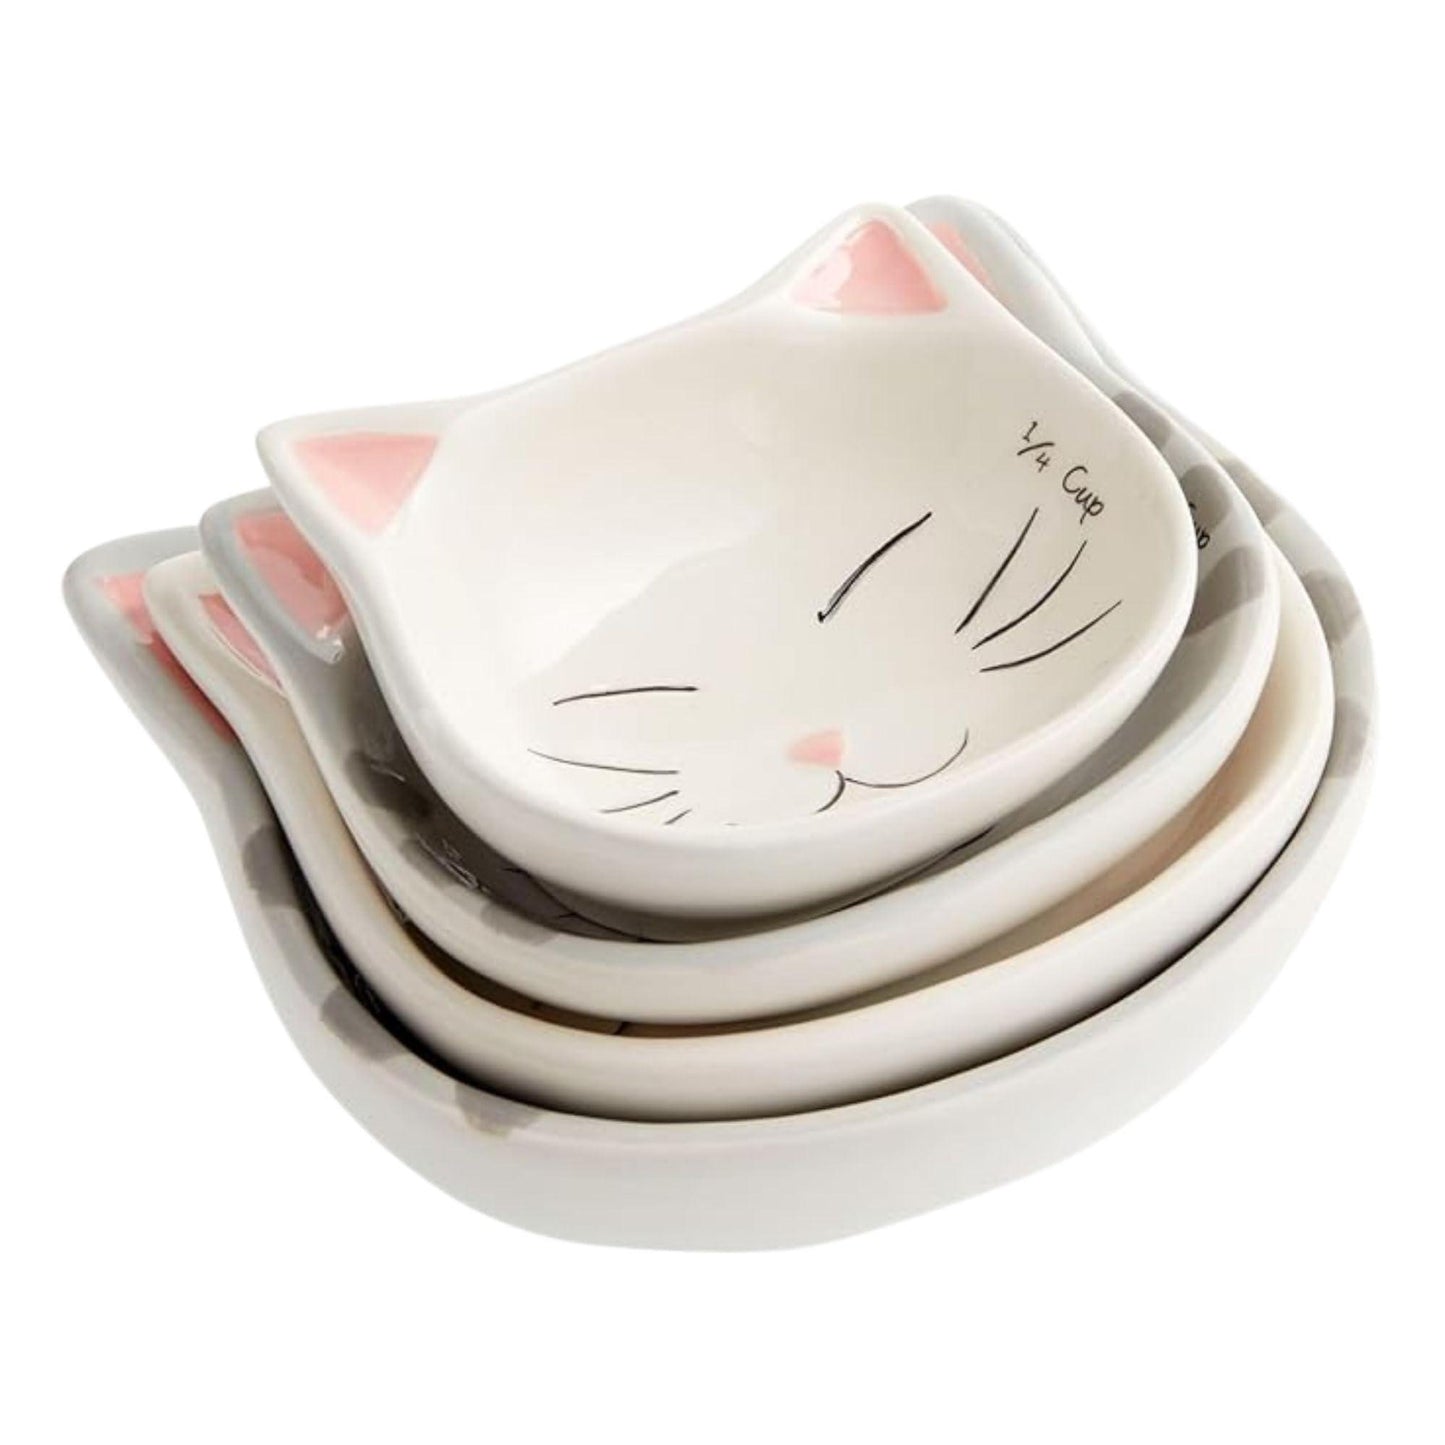 4-pcs Adorable Cat Ceramic Measuring Cups Set - Cute Measuring Cups for Kids Baking - Space Saving Measuring Cup Set for Food Portion Control - Cute Baking Accessories for Cat Lovers (Pack of 4) - CookCave